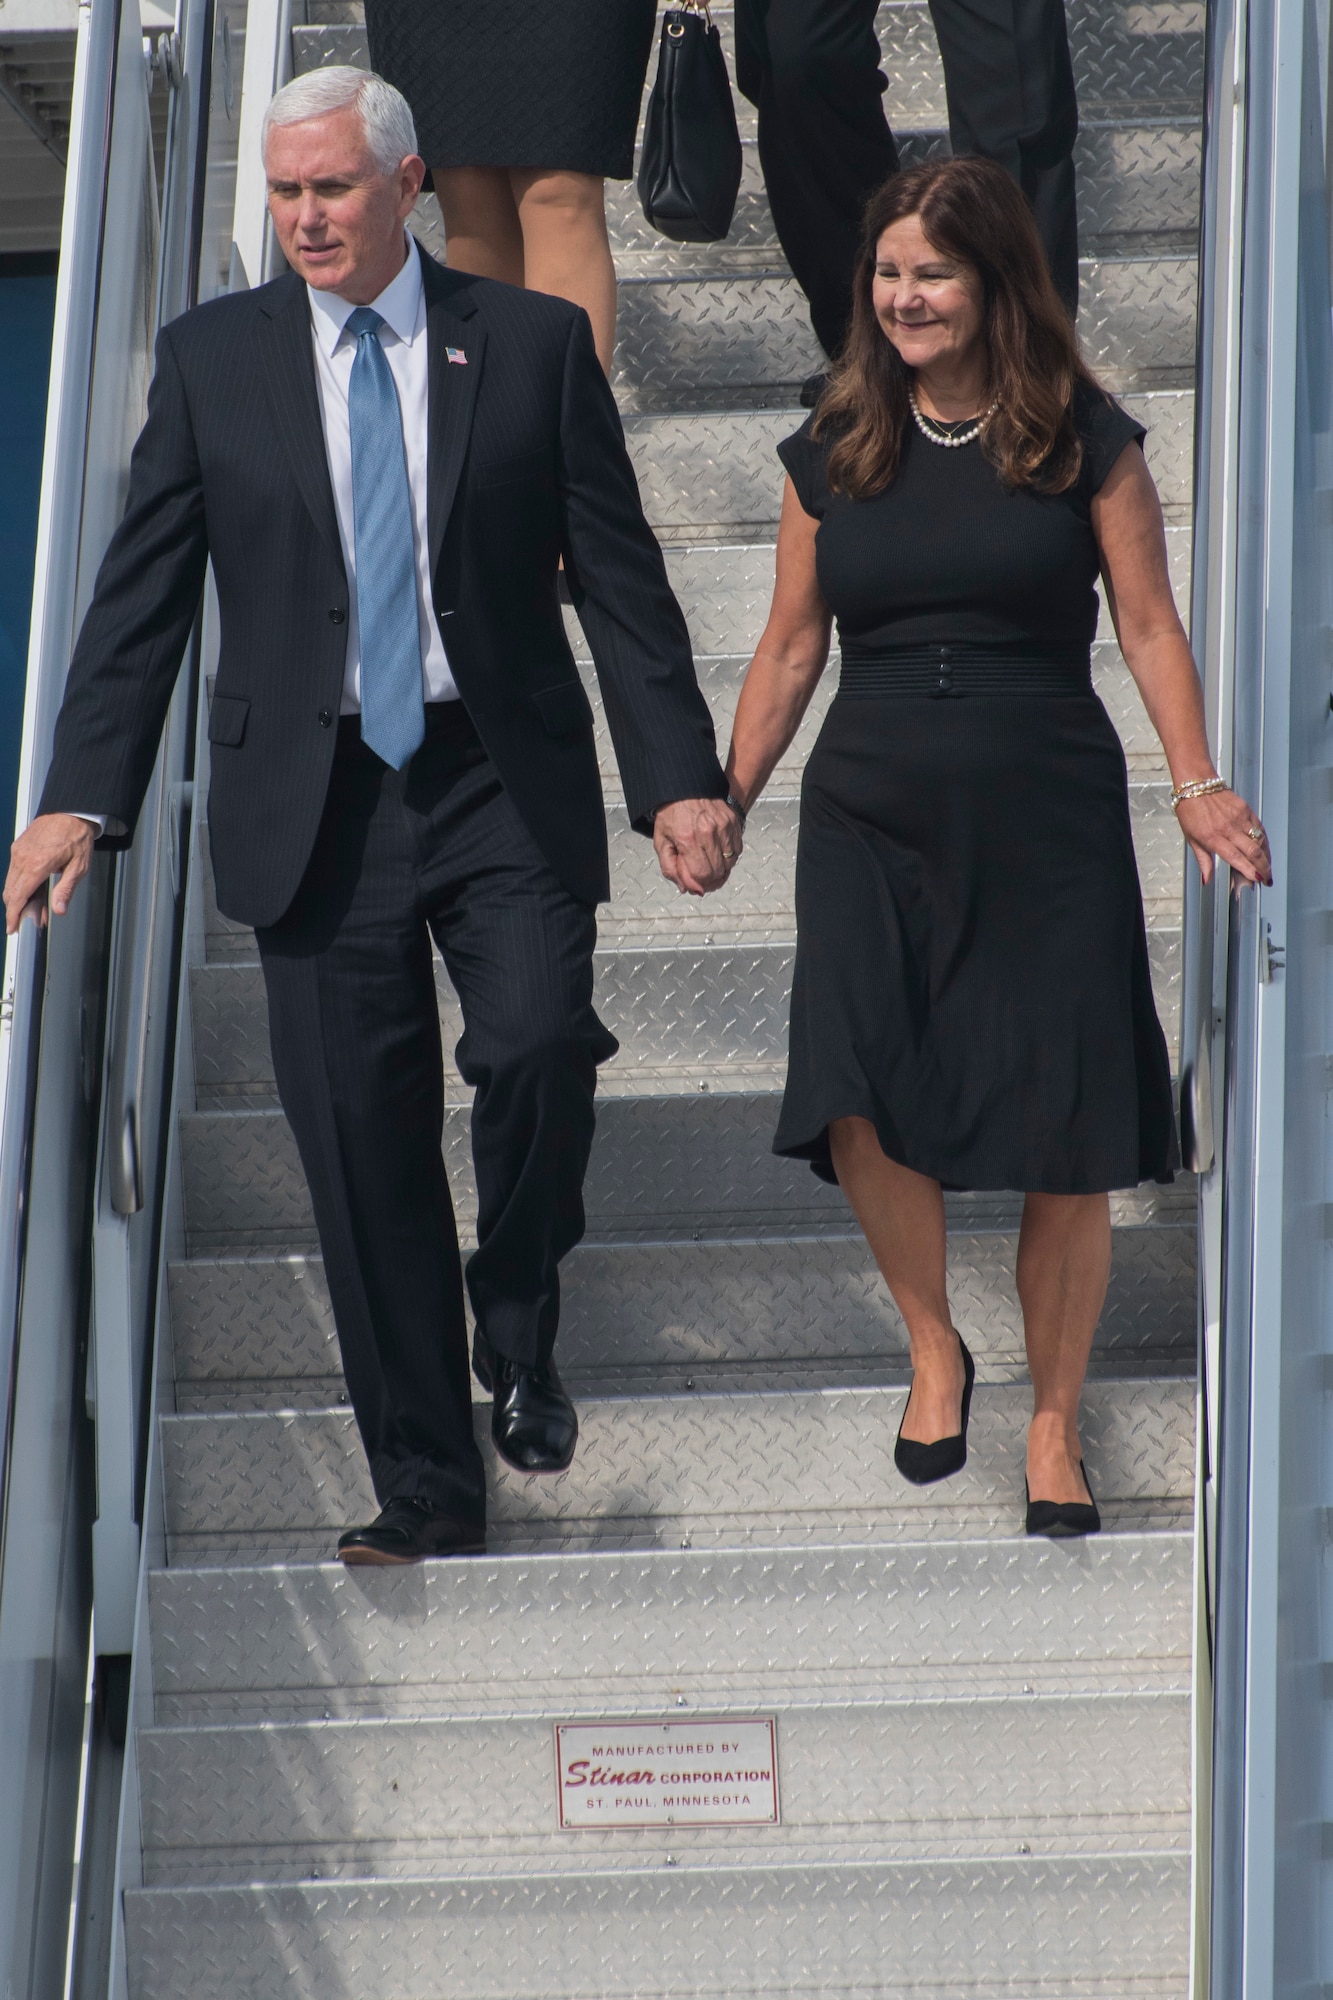 Vice President Michael Pence and his wife, Karen, disembark Air Force Two at Dobbins Air Reserve Base, Ga. on May 29, 2020.Air Force Two landed here around 10 a.m., marking the second time in two weeks the vice president has visited Georgia. (U.S. Air Force photo/Andrew Park)